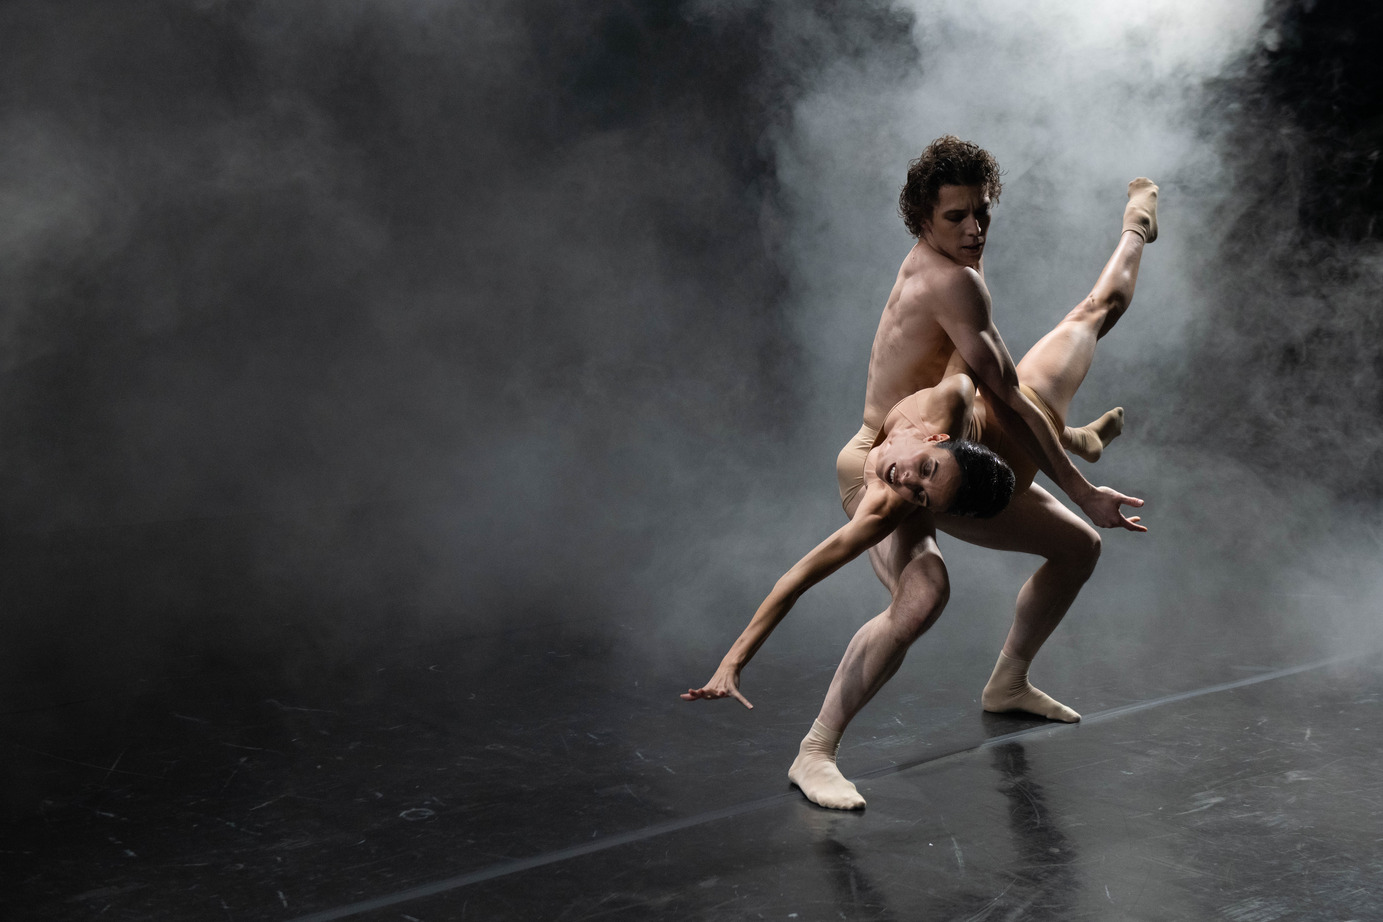 Boston Ballet’s ‘Our Journey’ that includes Nanine Linning and Justin Peck